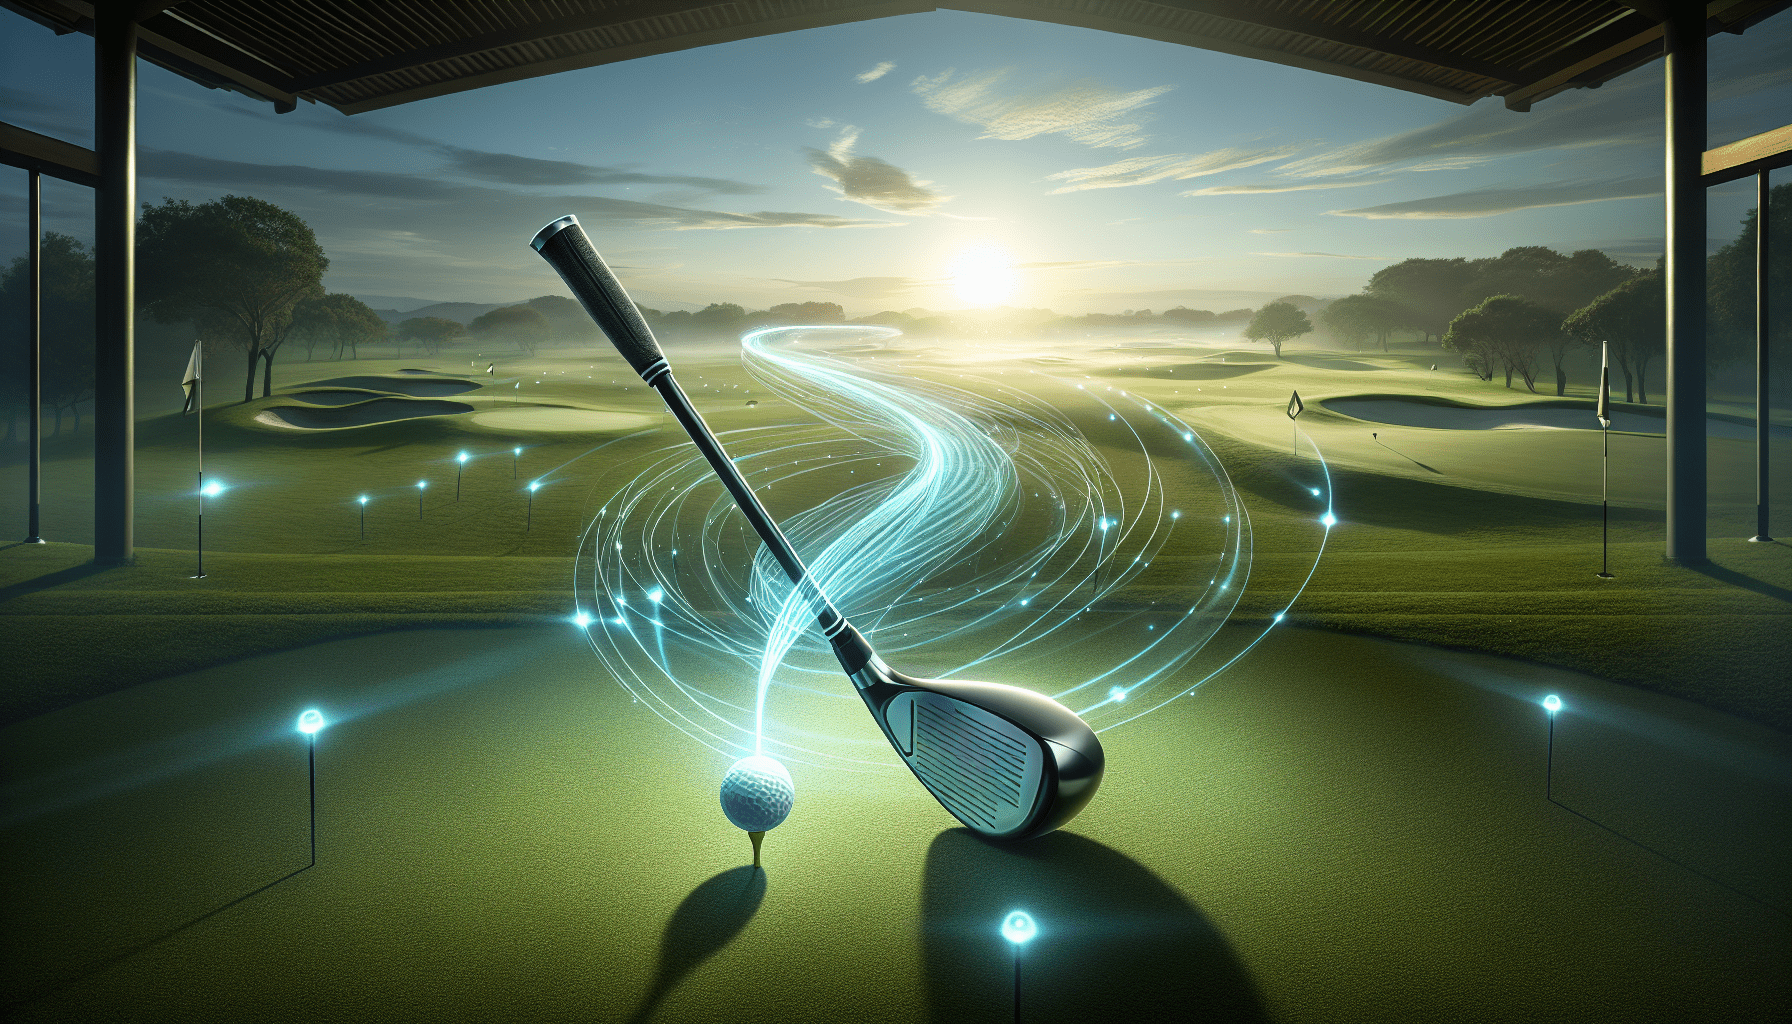 Improve Your Golf Swing with Laser Training Aids